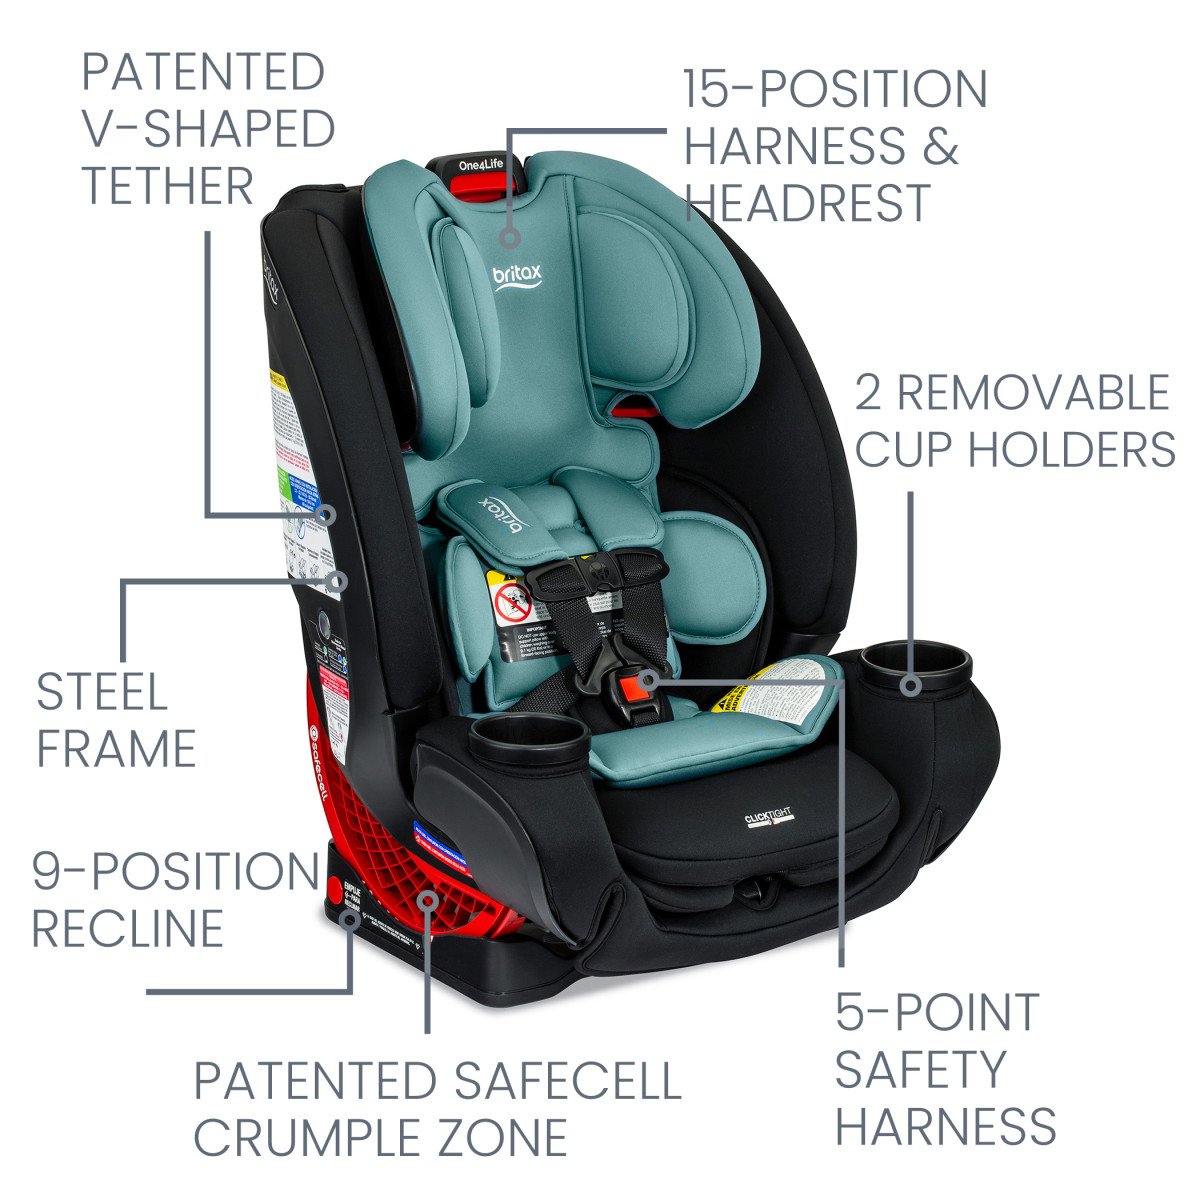 Product Anatomy Labeled on the Jade Onyx One4Life Car Seat (Copy)